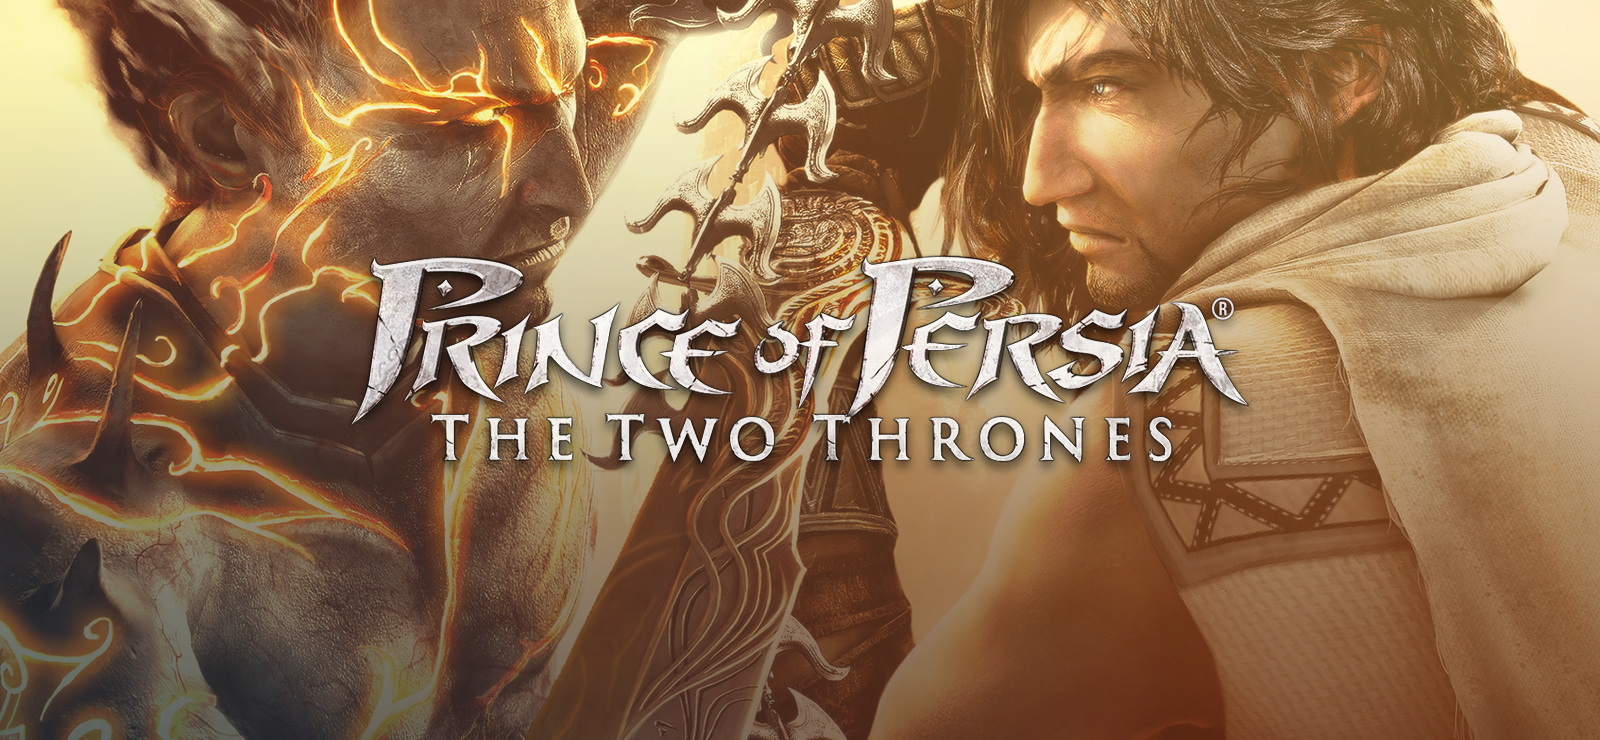 BESTSELLER - Prince Of Persia: The Two Thrones